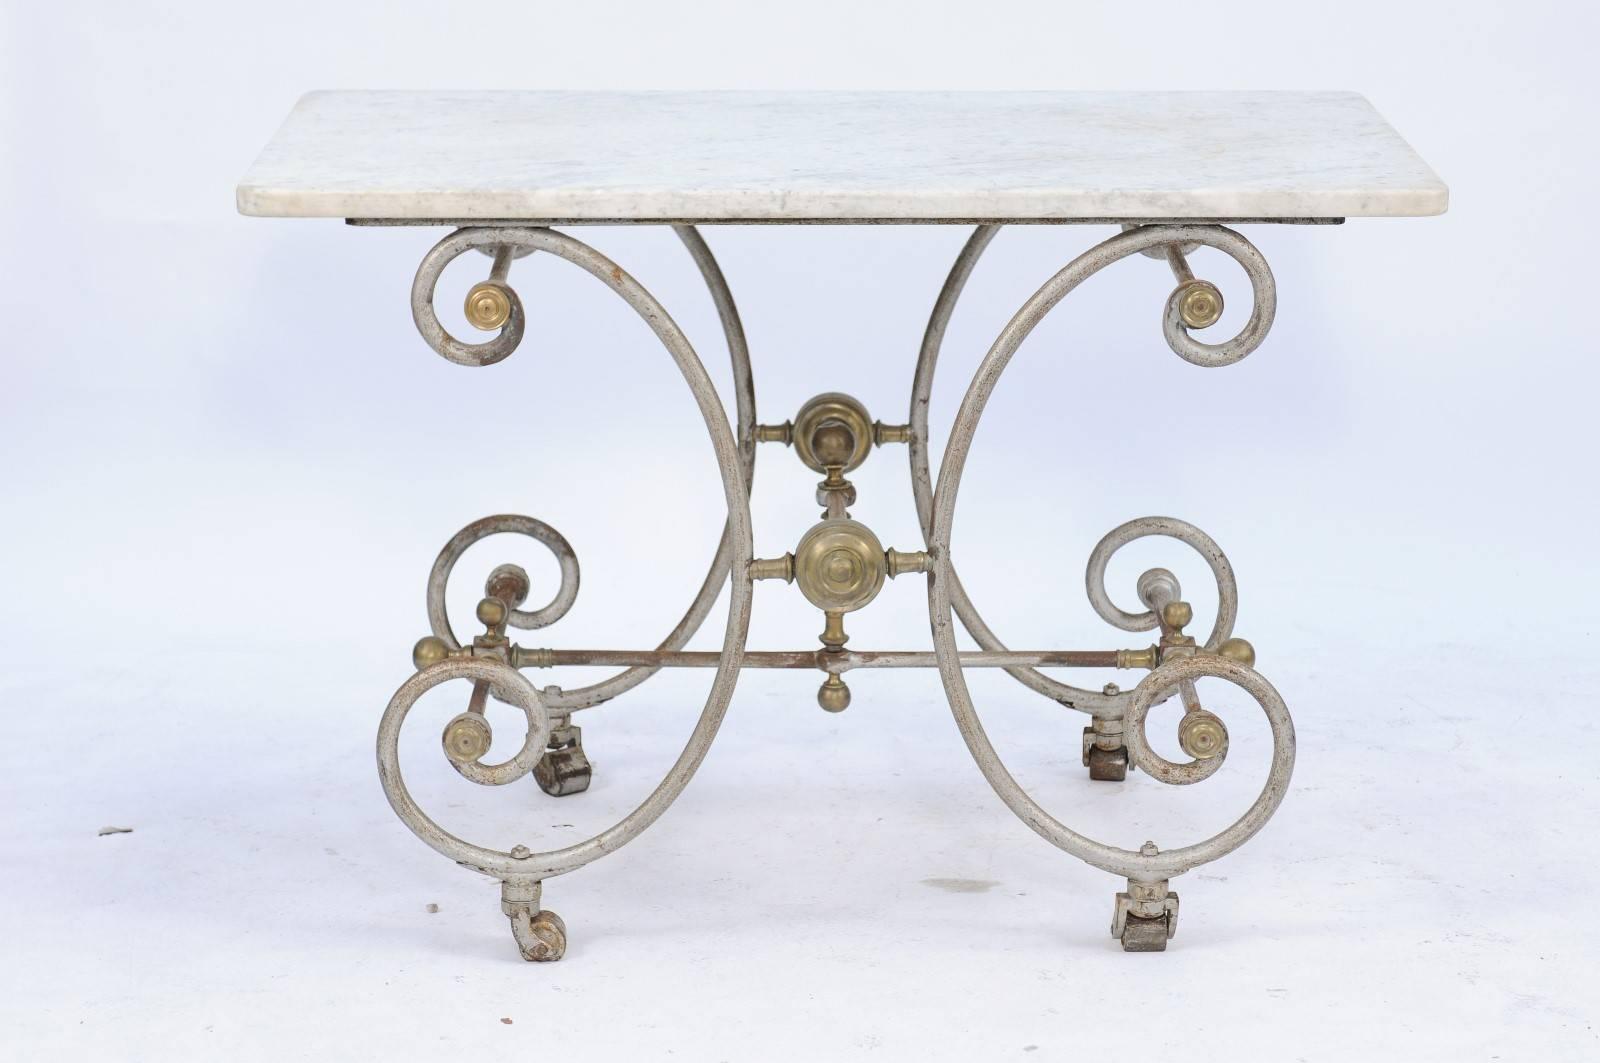 20th Century French Iron and Marble-Top Baker's Table with Curly Gilded Legs and Casters